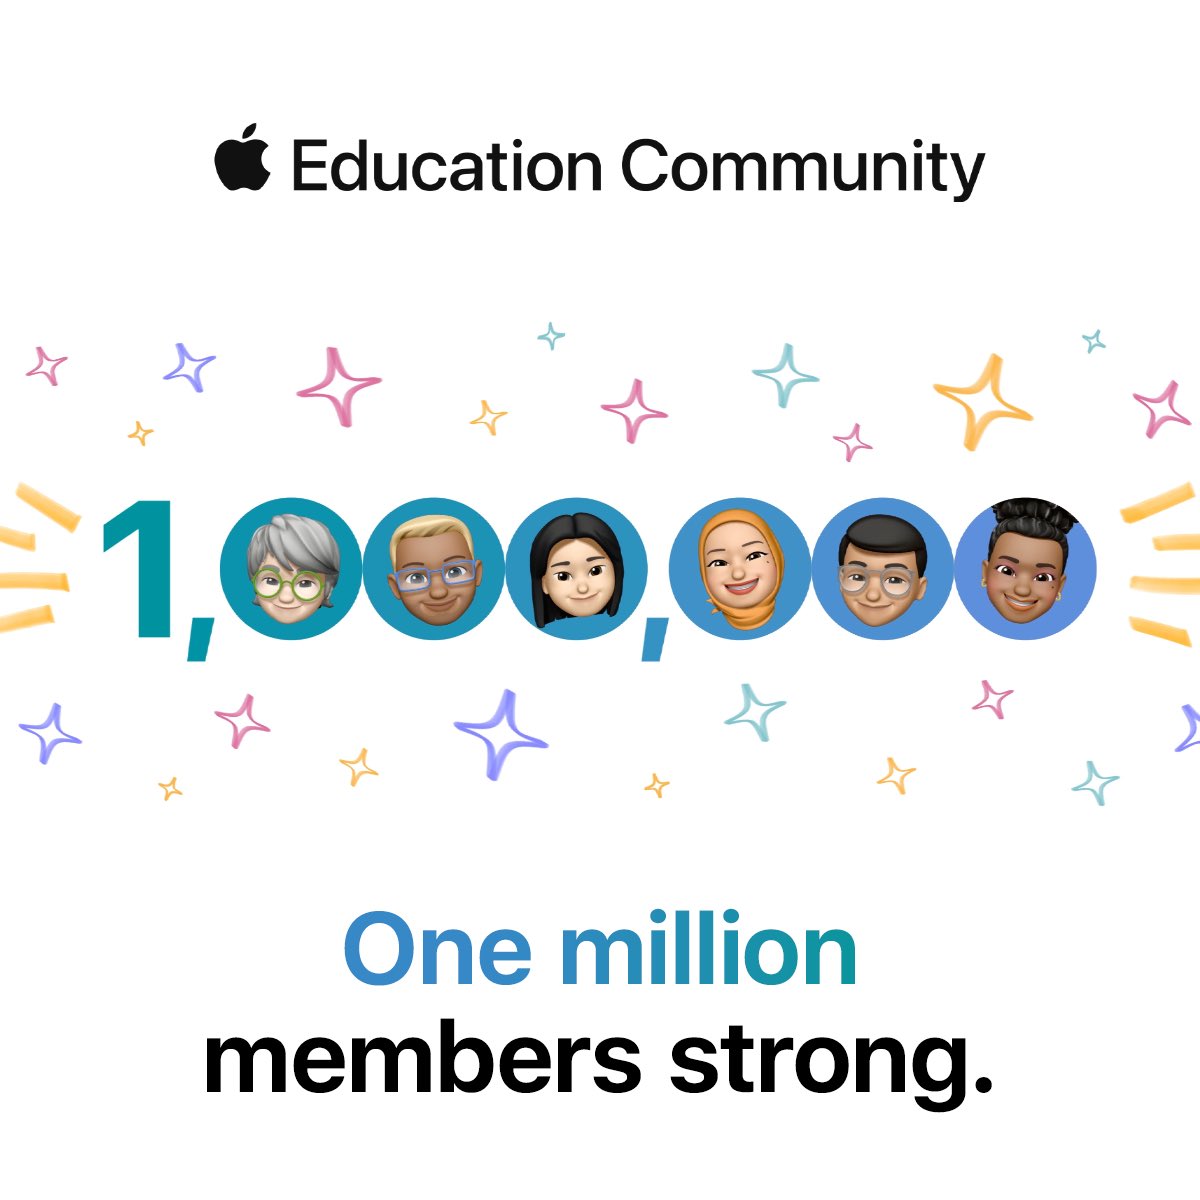 What I love about the Apple Education Community is that I can connect and collaborate with teachers around the world! You can learn from and with each other regardless of time, place or language. #AppleDistinguishedEducator #AppleProfessionalLearningSpecialist